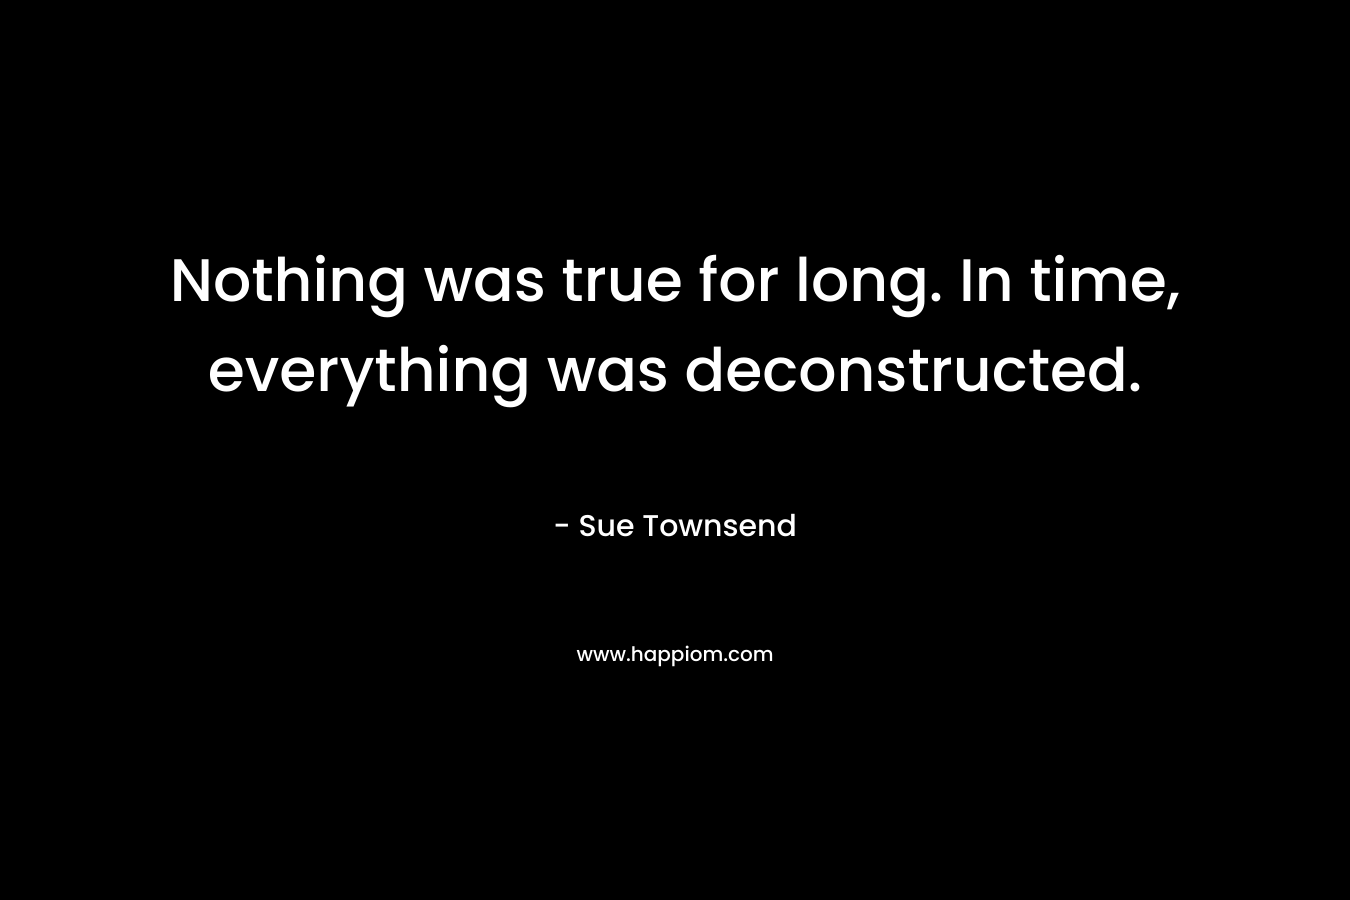 Nothing was true for long. In time, everything was deconstructed.